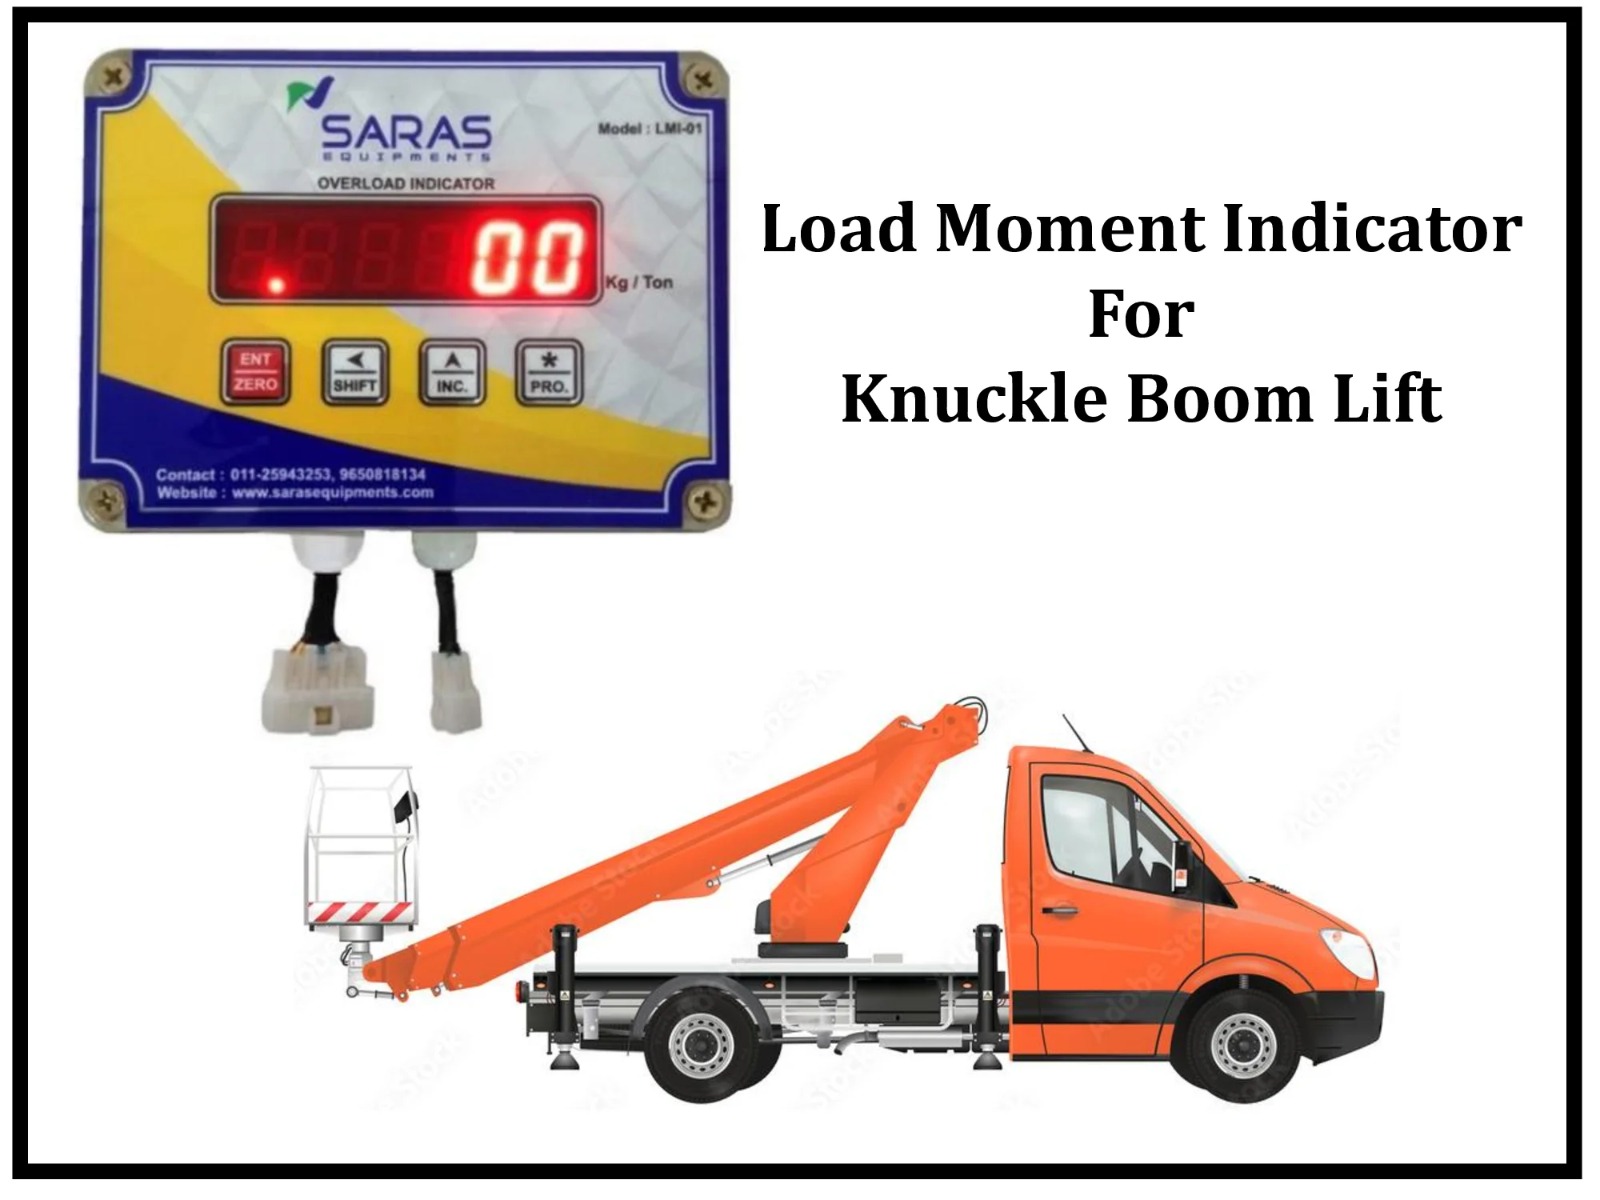 Load Moment Indicator For Knuckle Boom Lift